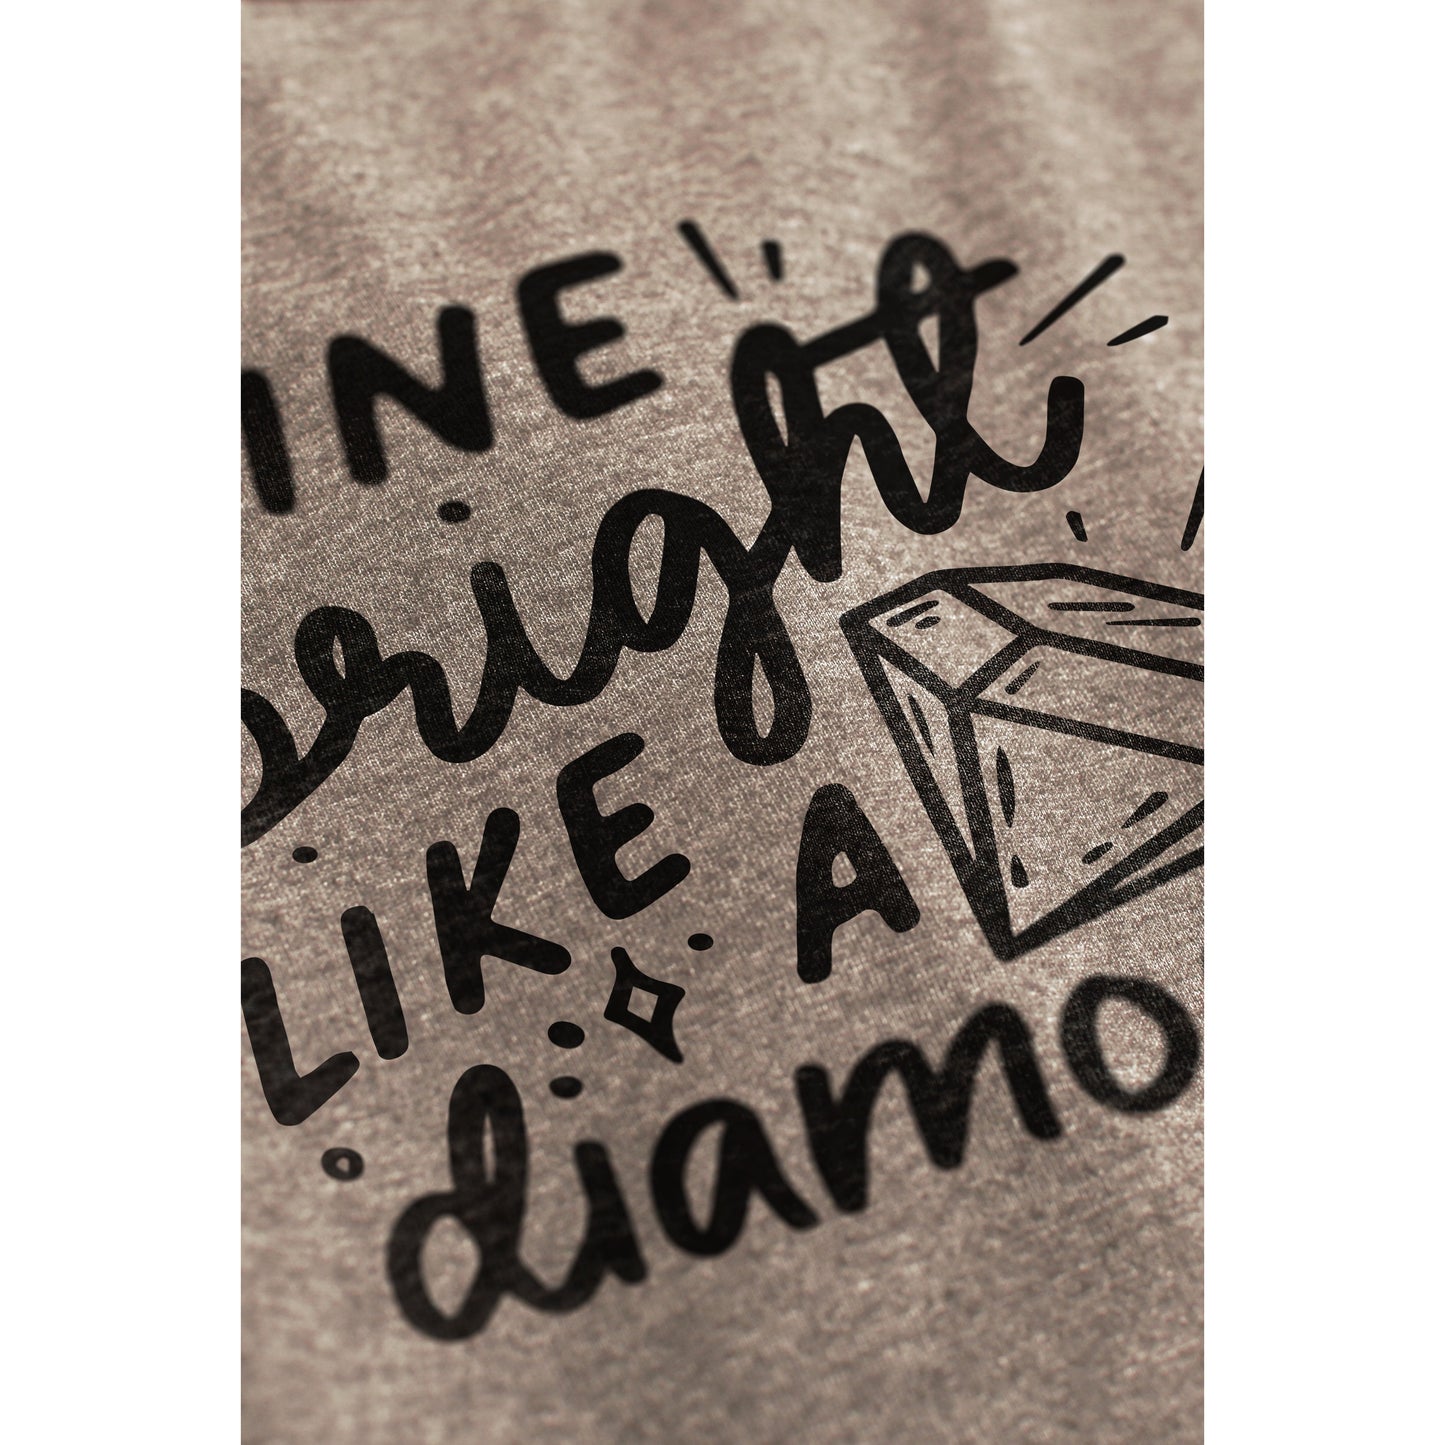 Shine Bright Like A Diamond - Stories You Can Wear by Thread Tank